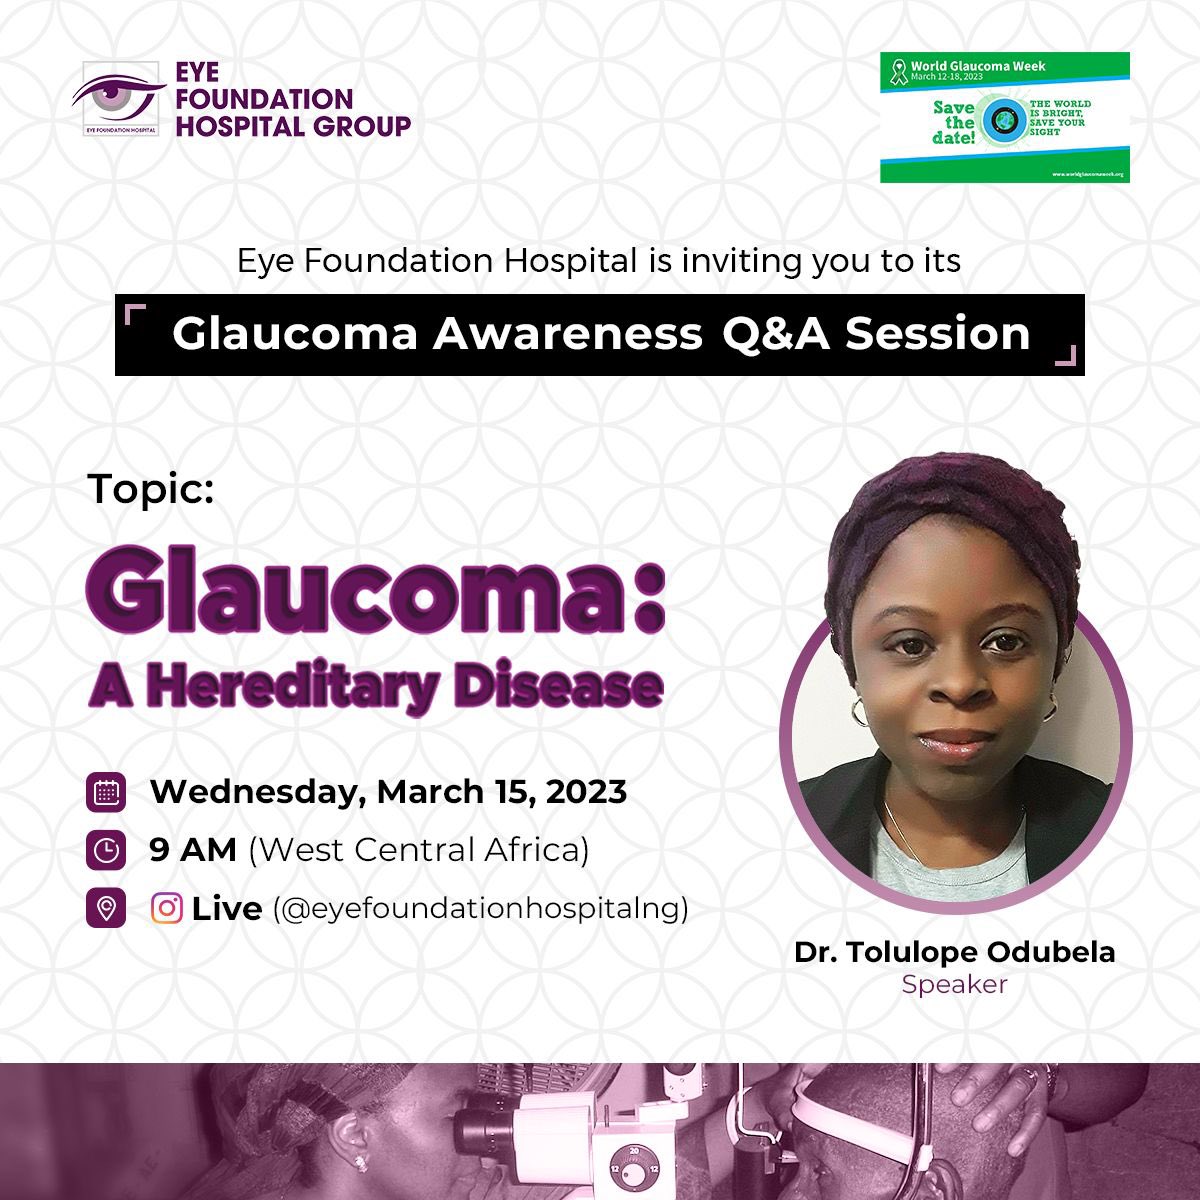 Eye Foundation Hospital invites you to its Glaucoma Awareness Q&A Session. It holds on Wednesday, 15th March 2023, on Insta Live.

Dr. Tolulope Odubela will be answering all your questions as they relate to glaucoma.

#glaucomaweek #glaucomaawareness #glaucoma